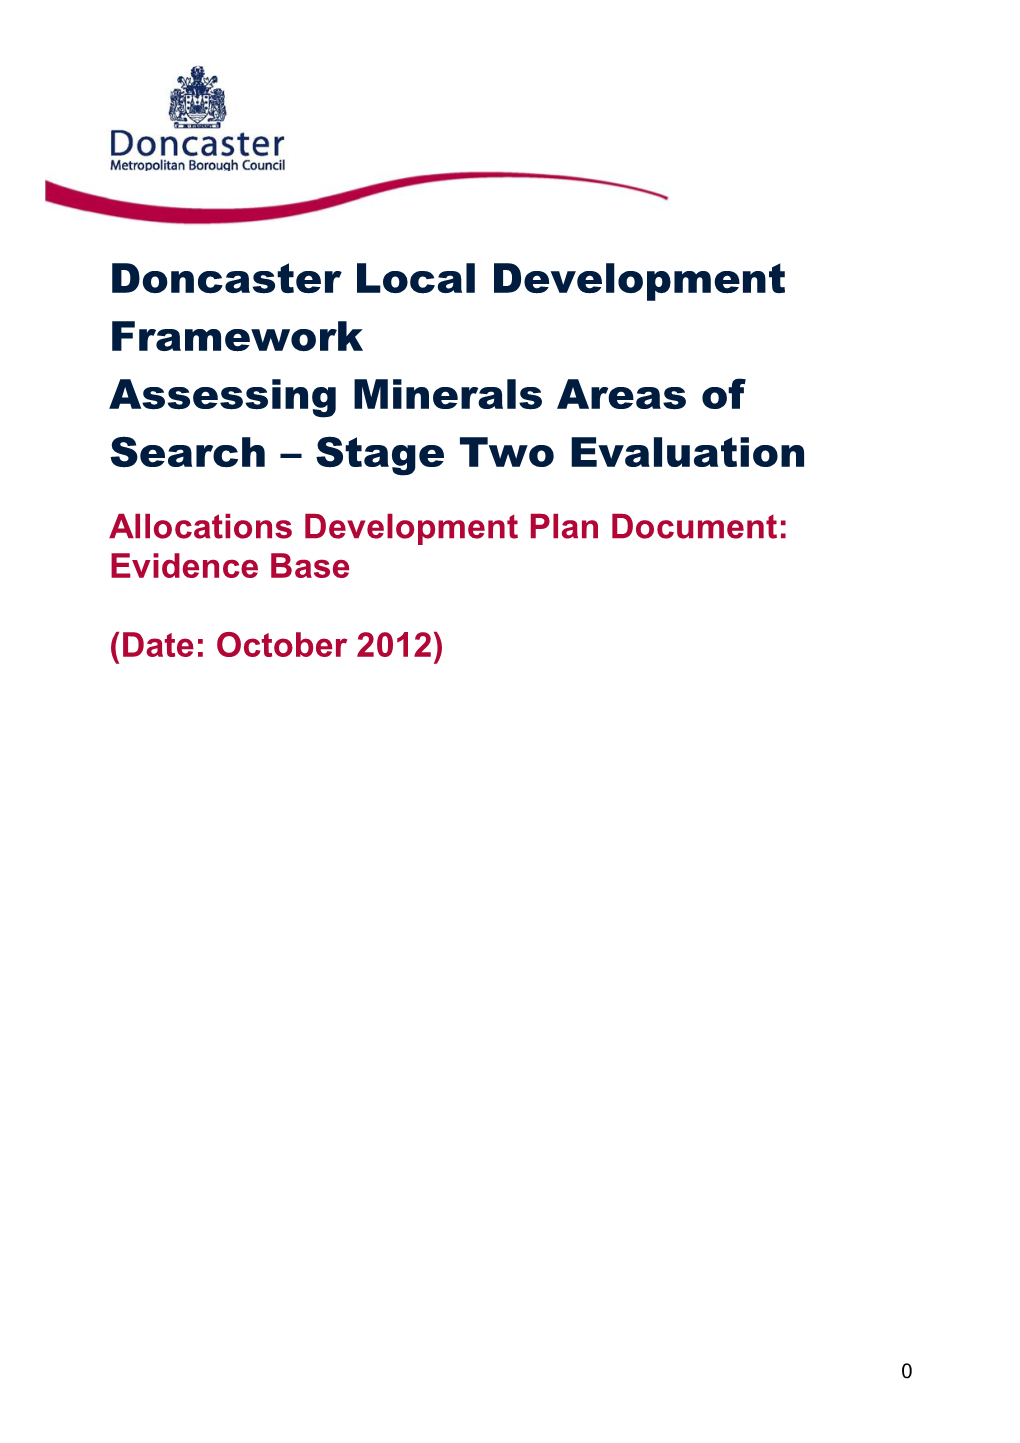 Doncaster Local Development Framework Assessing Minerals Areas of Search – Stage Two Evaluation